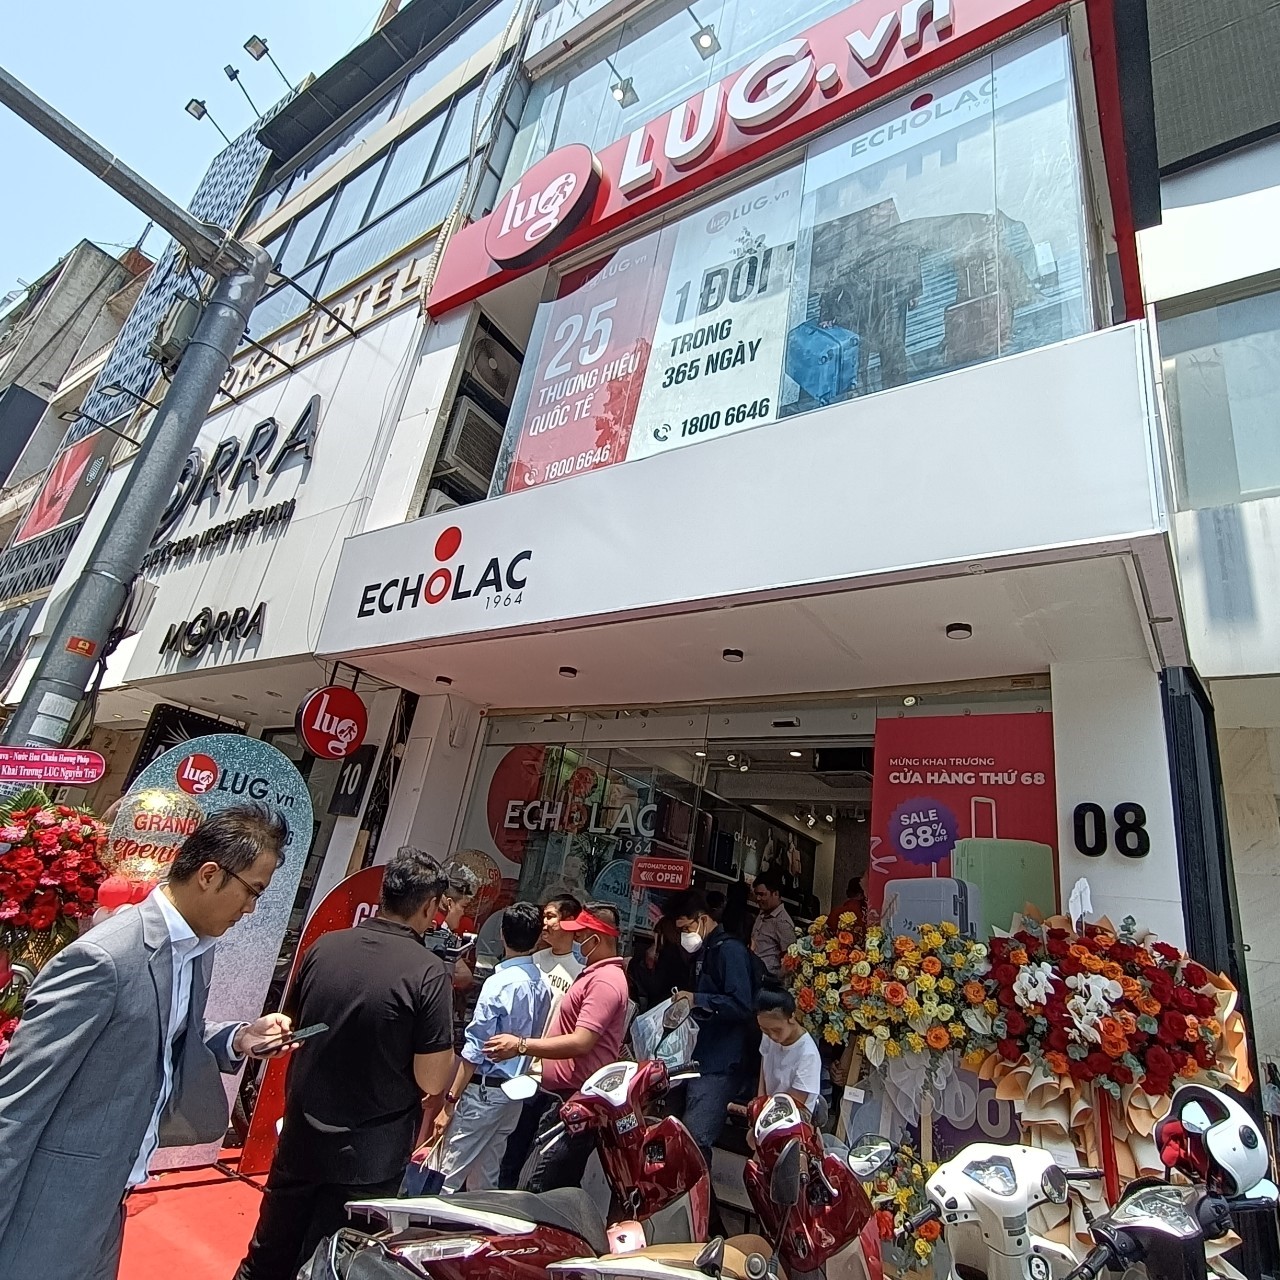 The 68th LUG.vn store at the intersection of Phu Dong 6, District 1, HCMC.